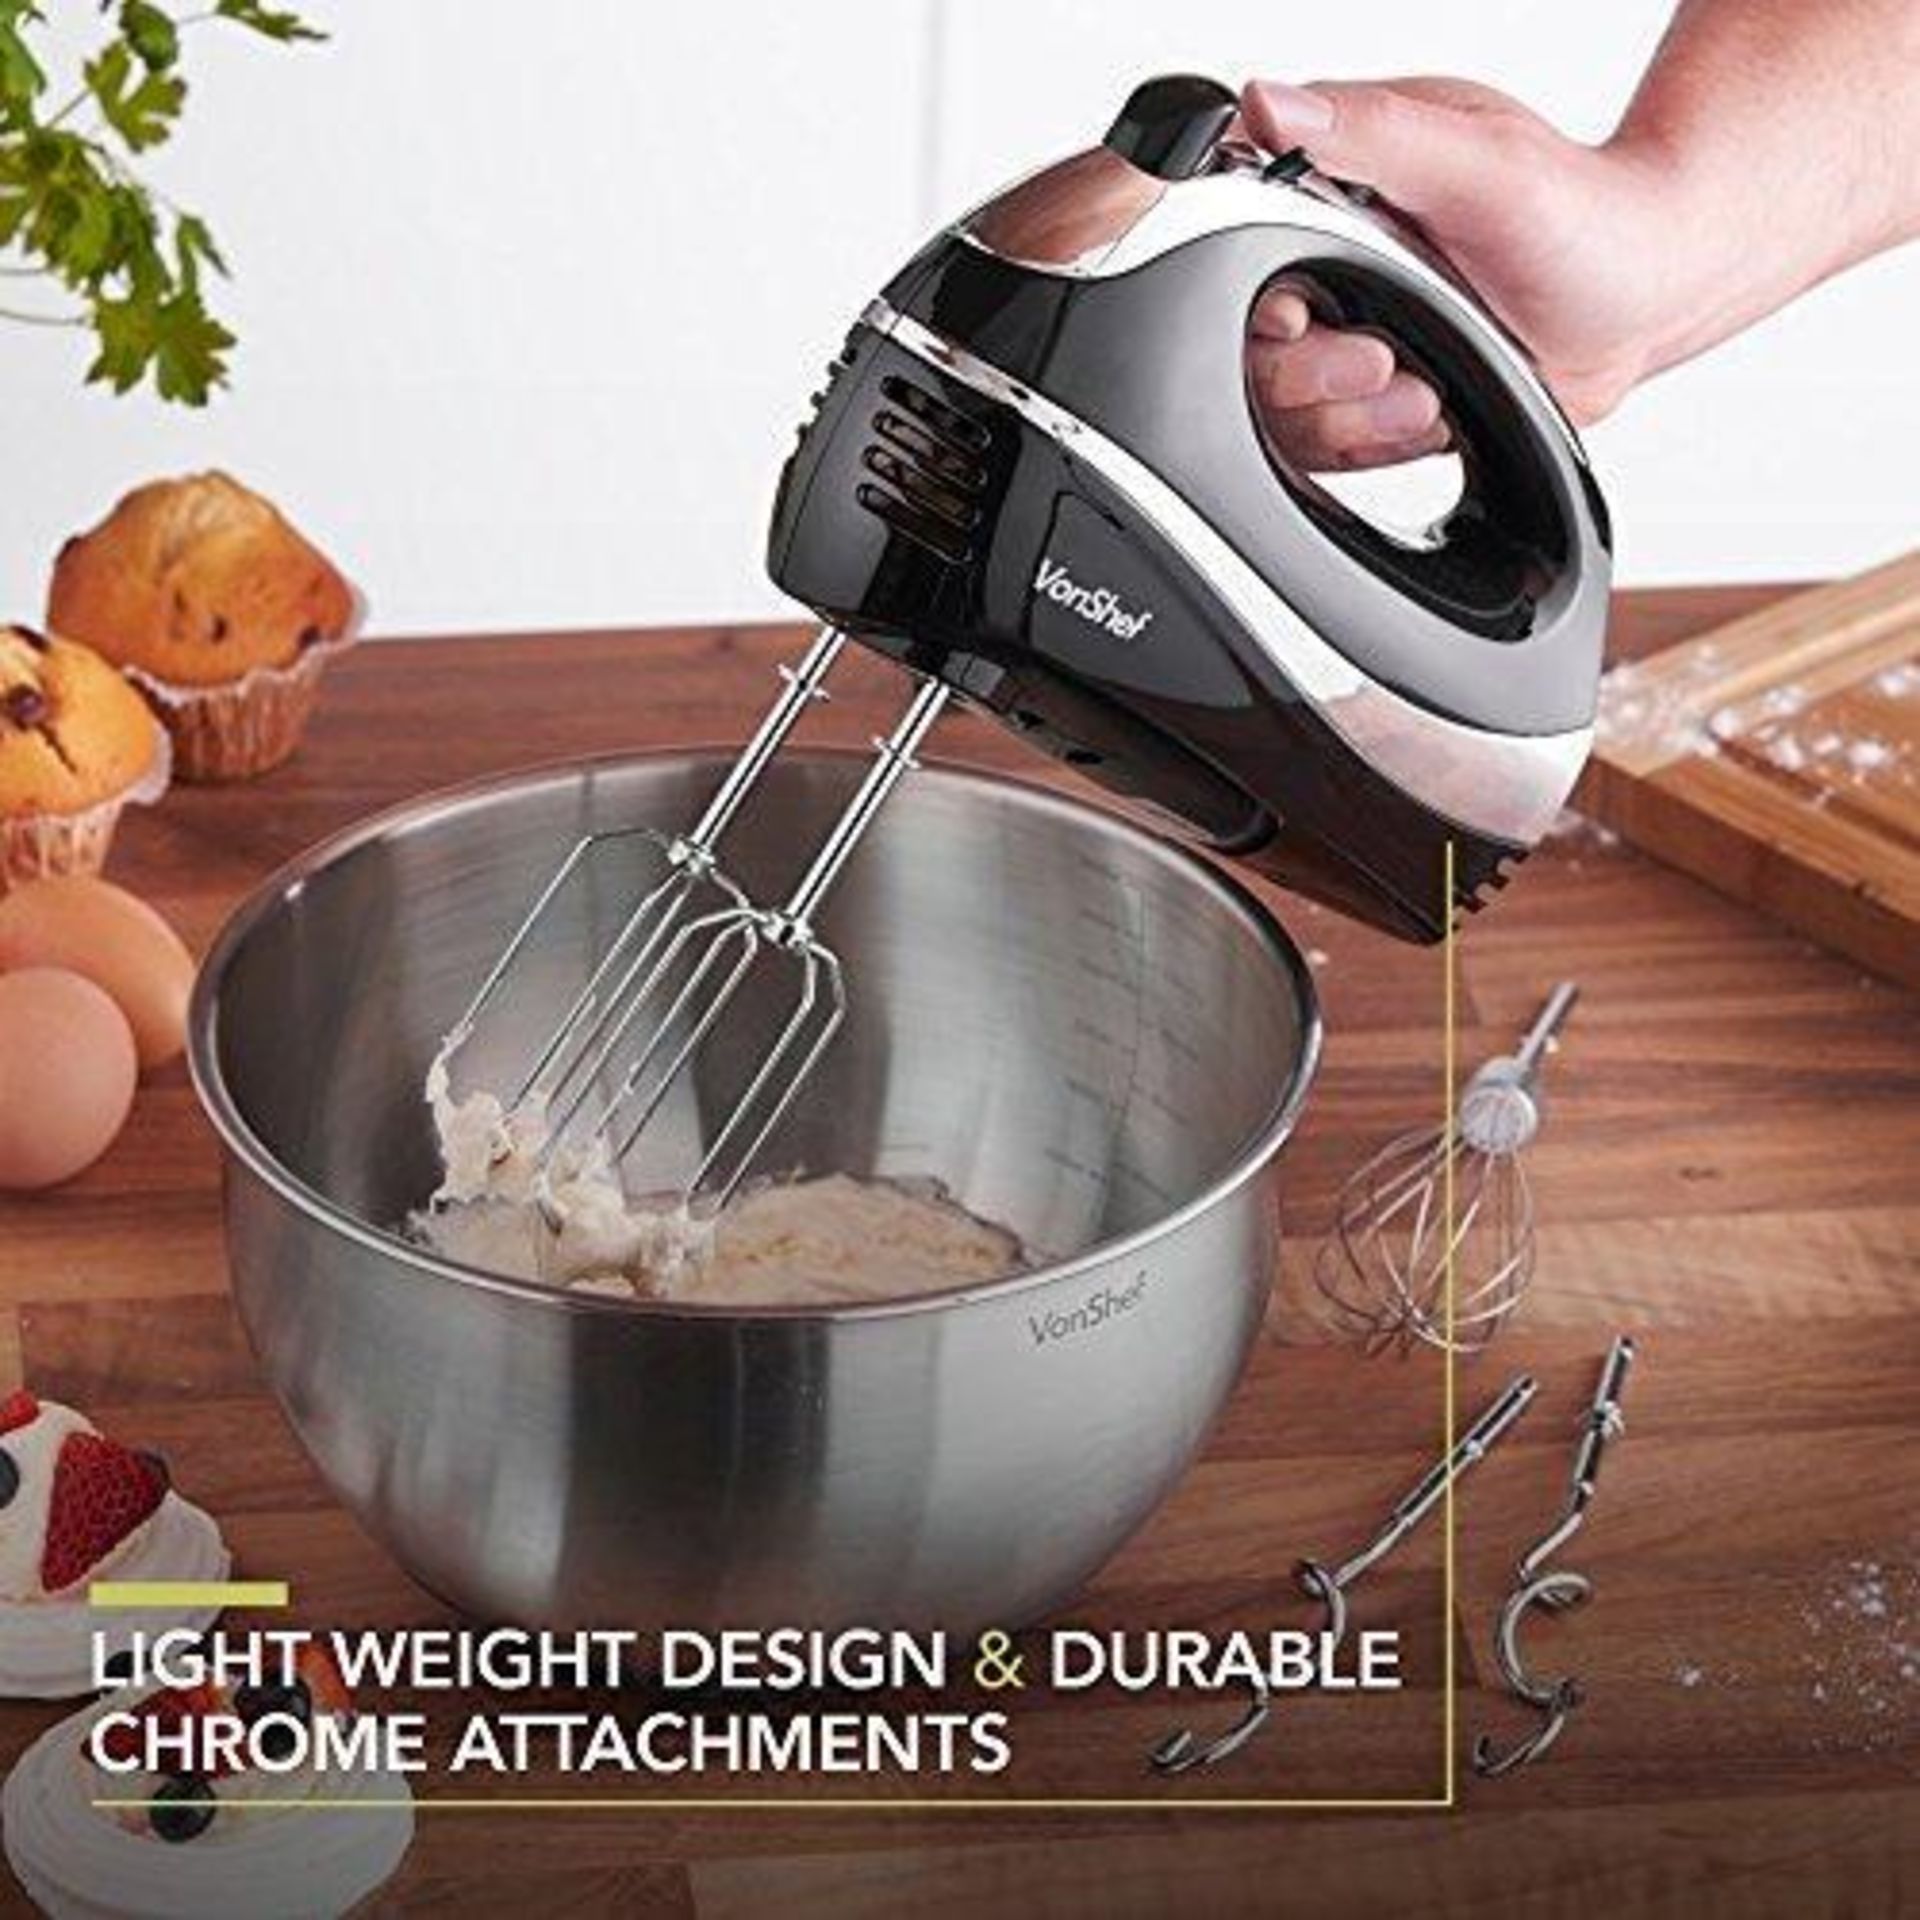 300W Hand Mixer - Black300W Hand Mixer - BlackThis is the ultimate kitchen appliance if you love